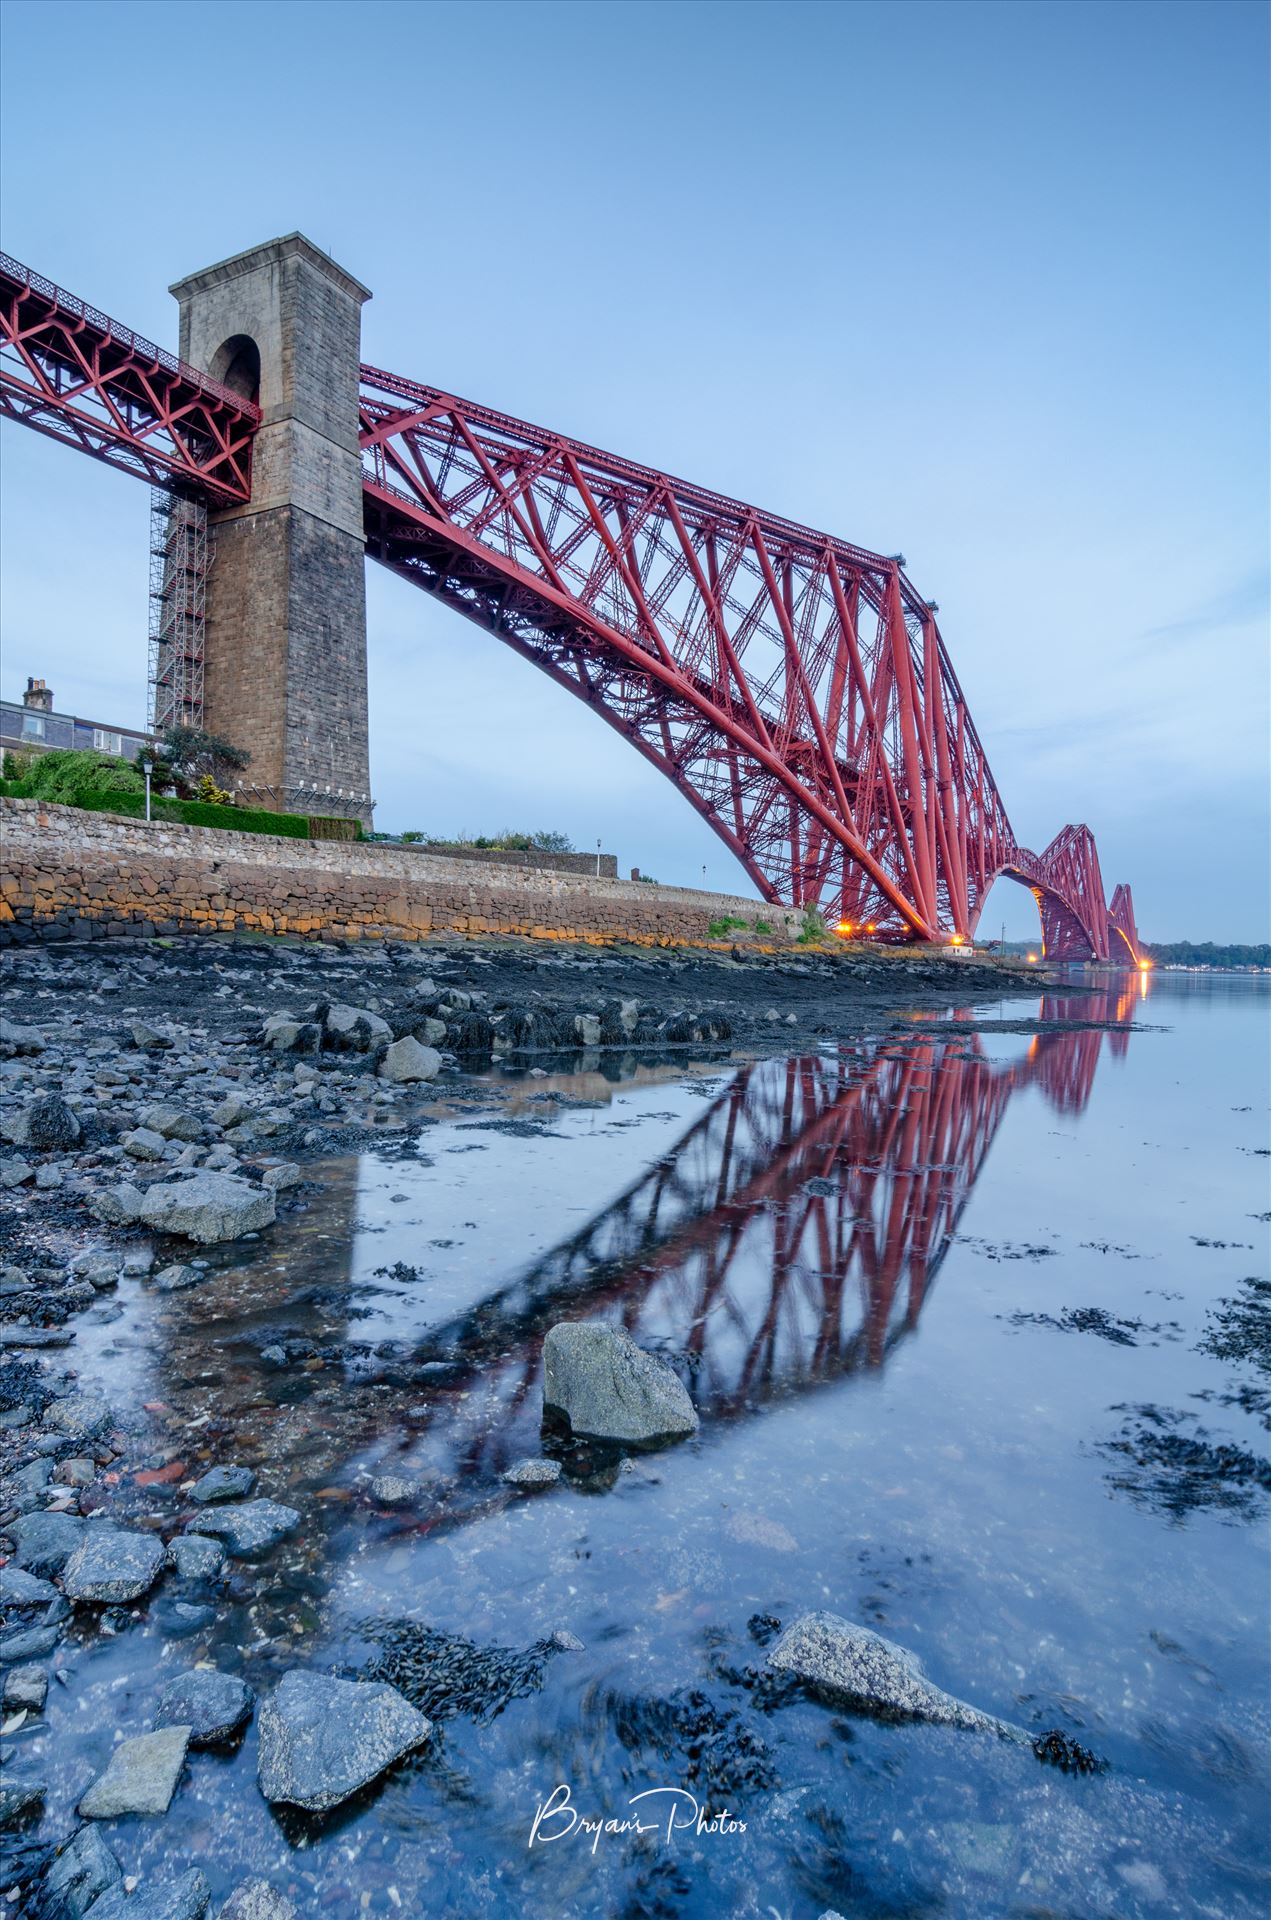 The Rail Bridge Portrait A portrait photograph of the Forth Rail Bridge taken from North Queensferry. by Bryans Photos